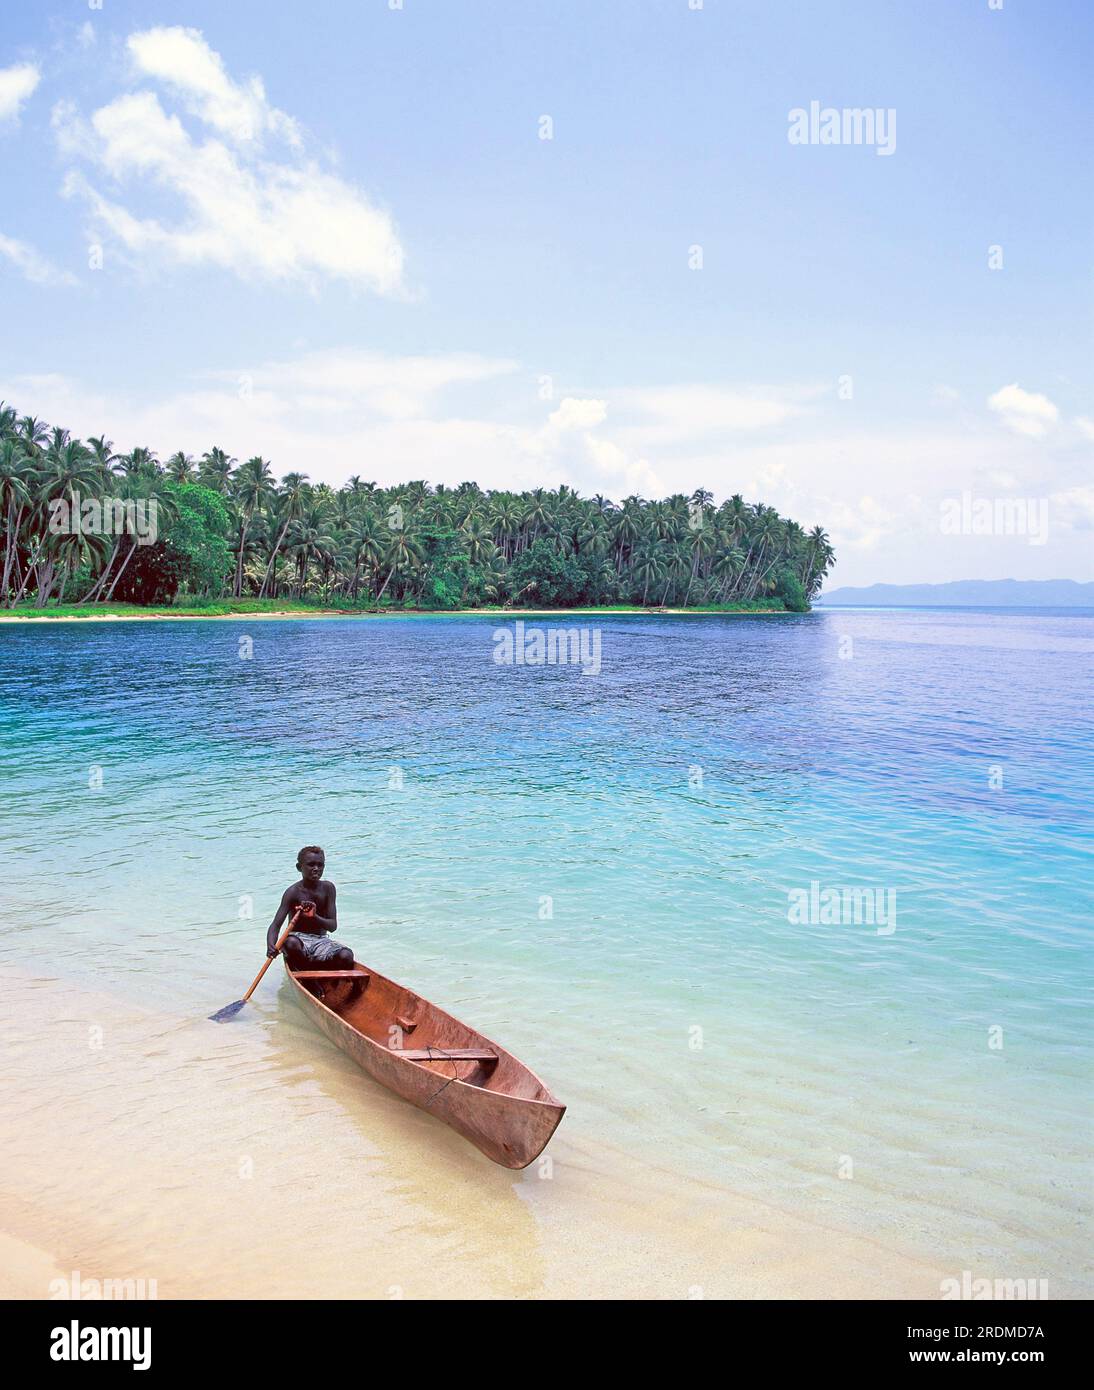 Solomon Islands: Vibrant people and places of the South Pacific nation